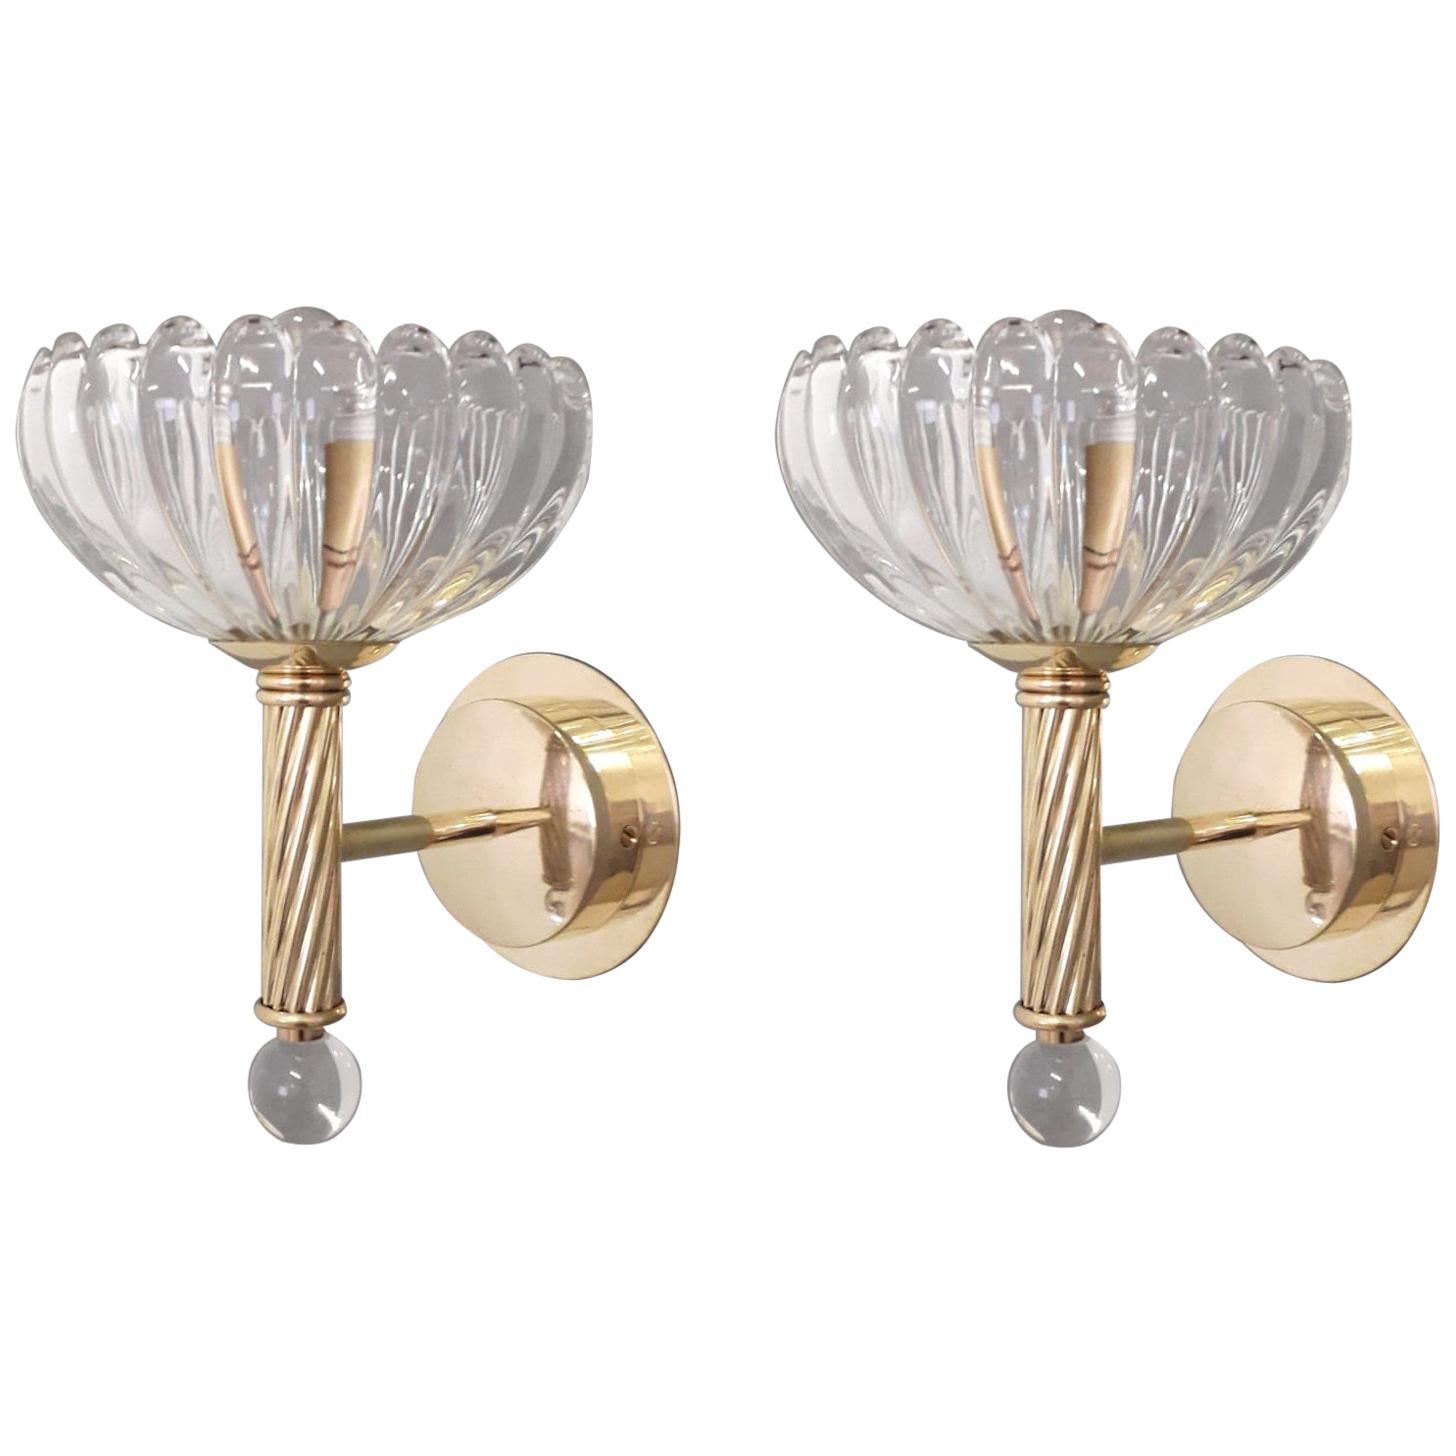 Pair of Cups Sconces by Barovier et Toso - 2 Pairs Available